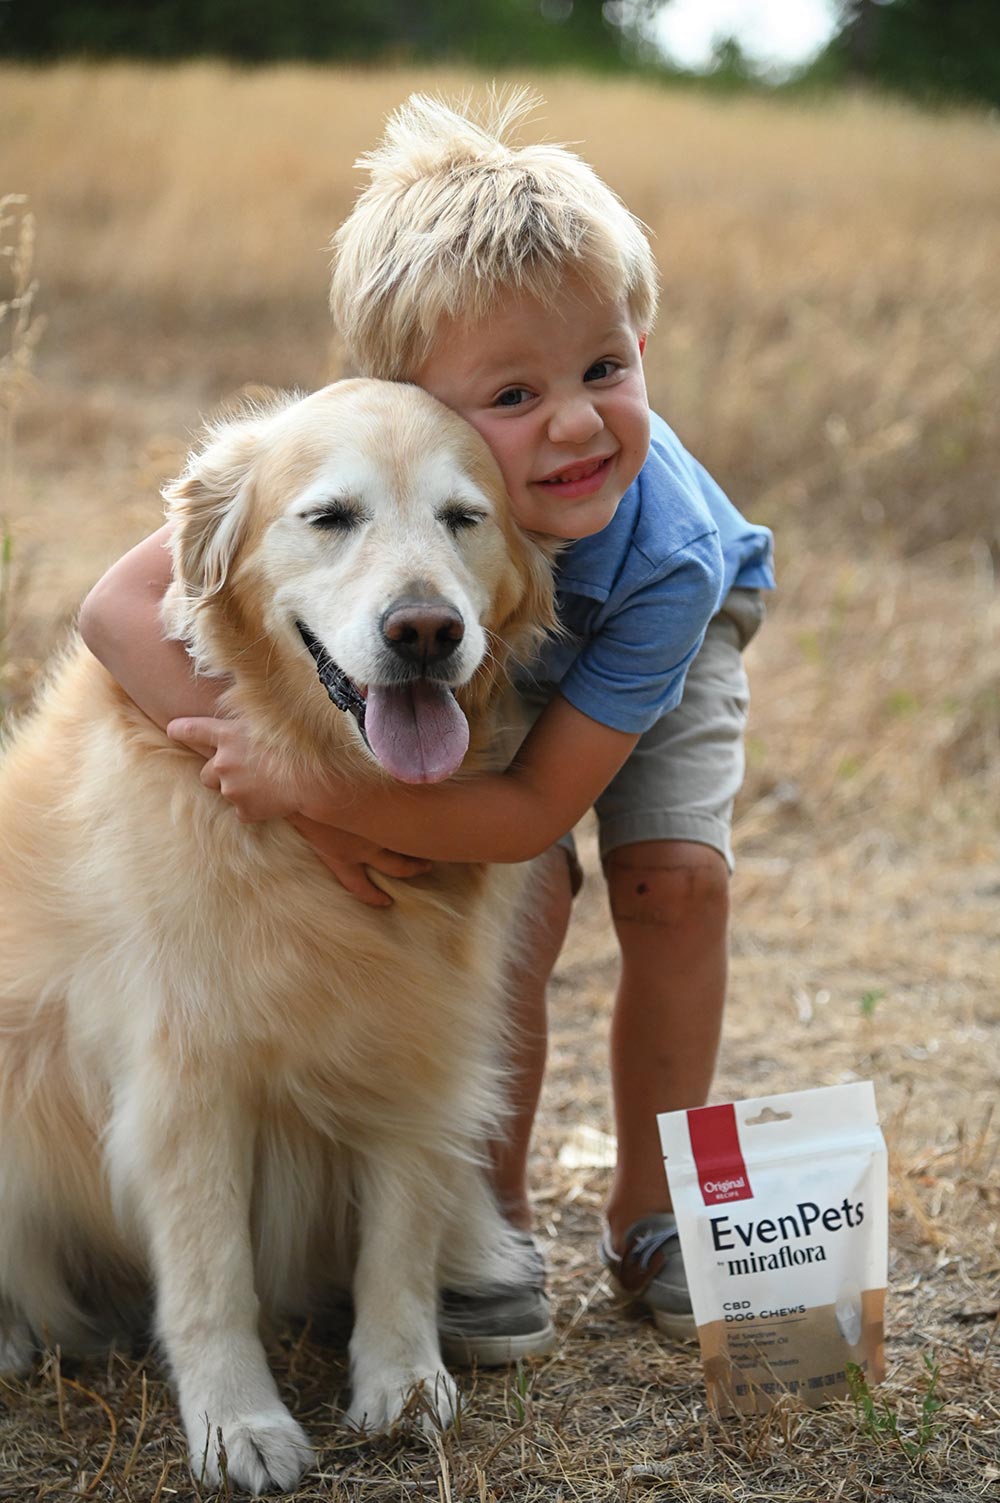 A boy hugging his dog with the EvenPets dog chews